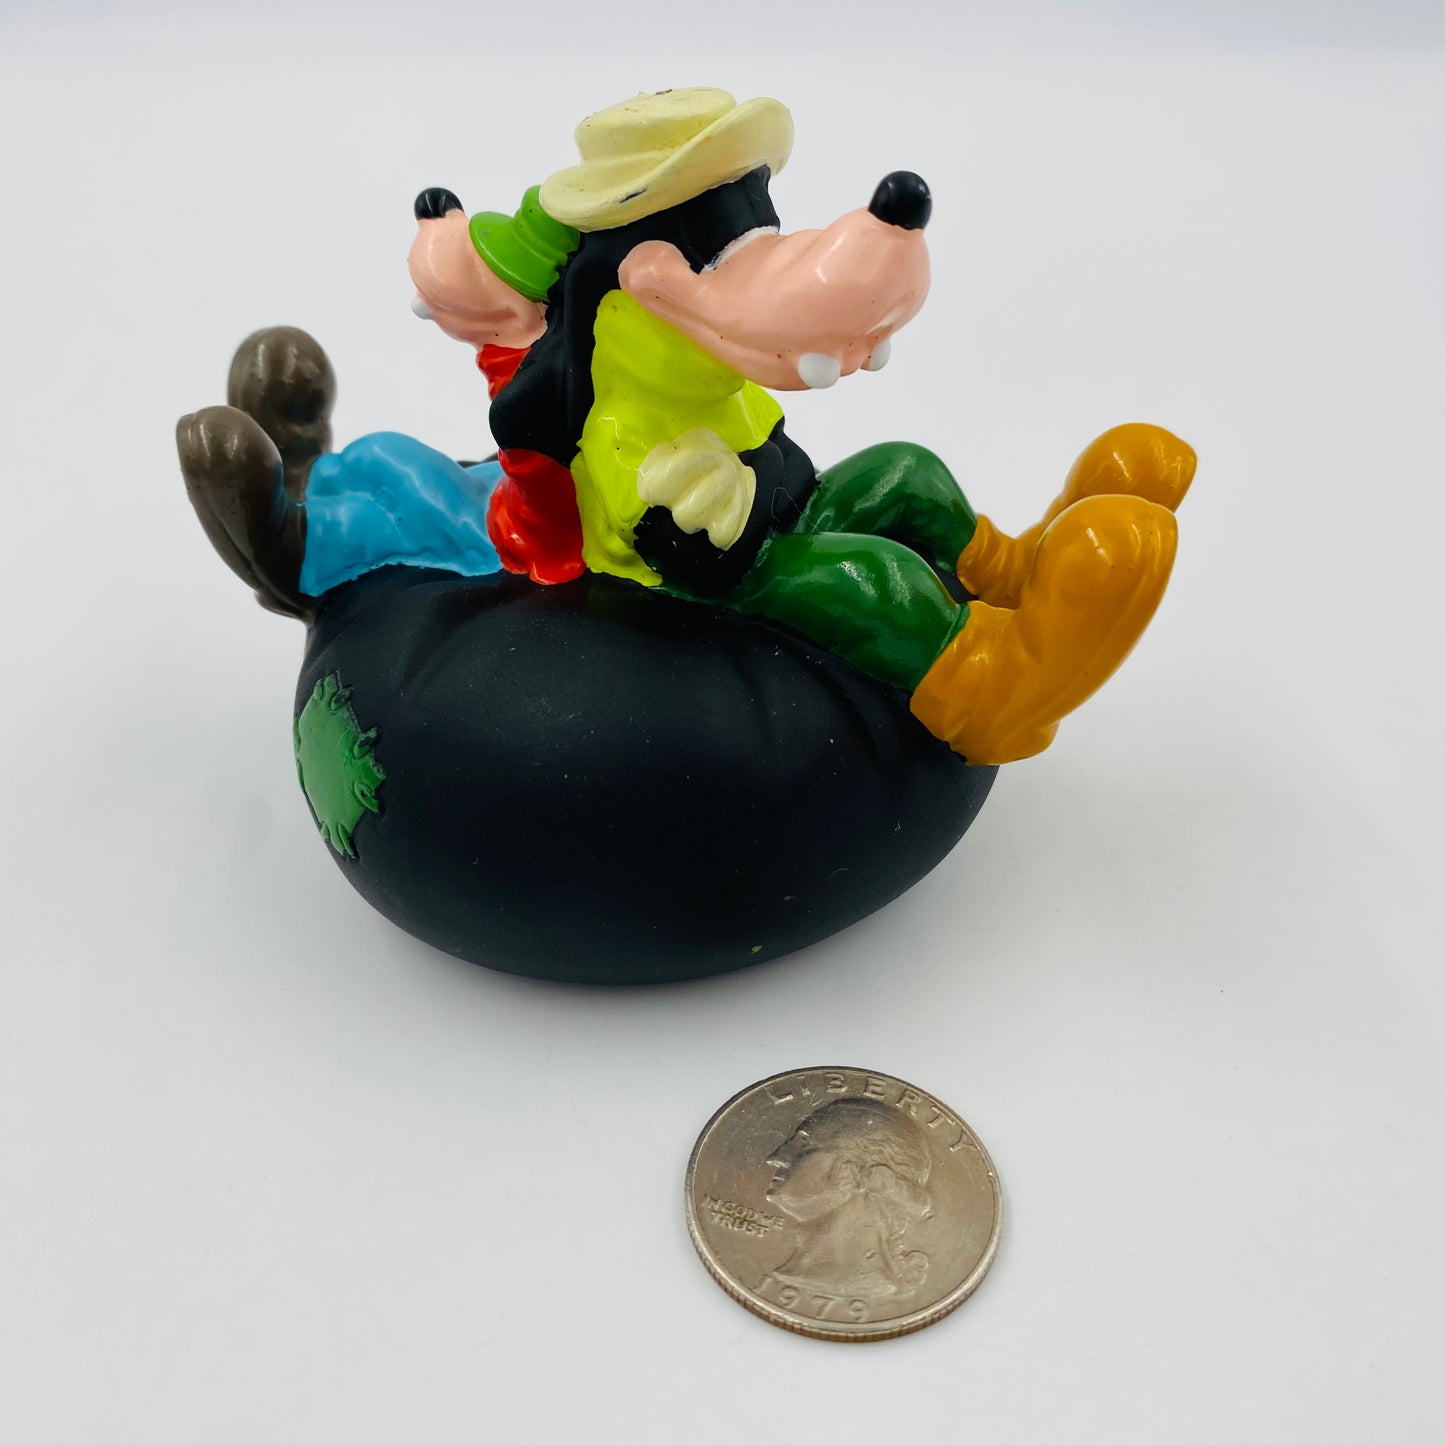 A Goofy Movie Goofy and Max in Water Raft-Squirter Burger King Kids' Meal toy (1995) loose